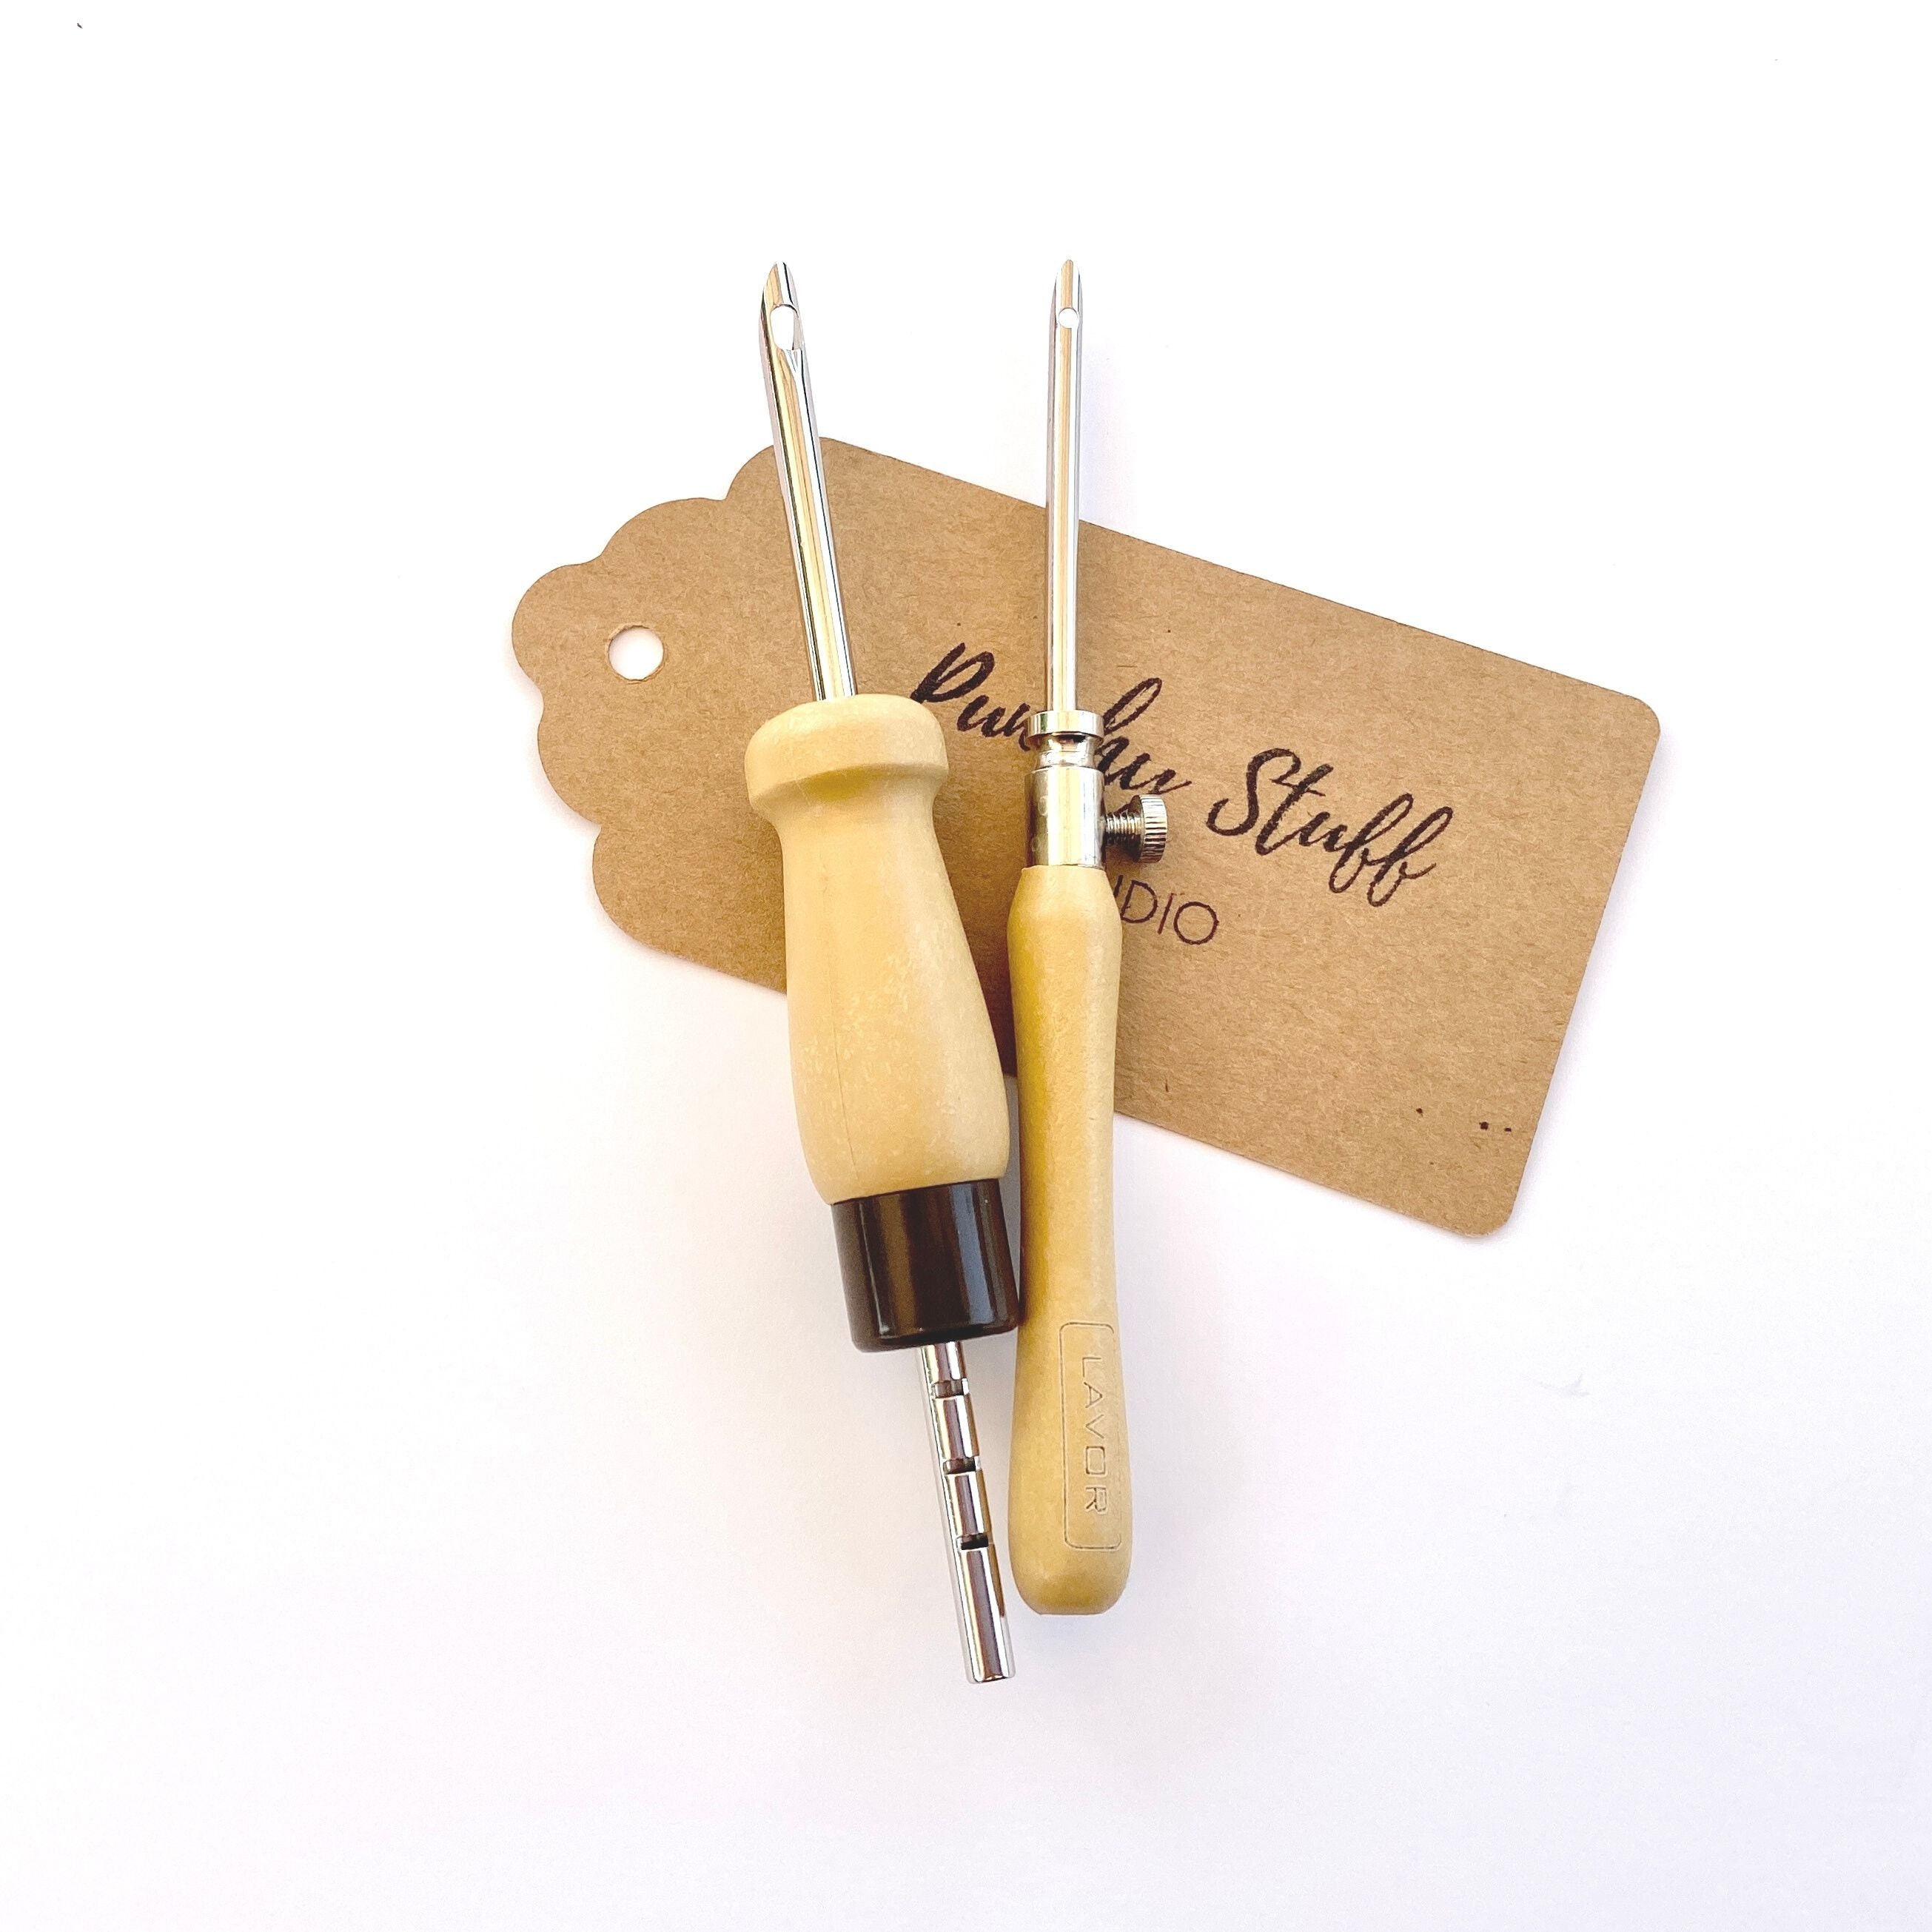 Lavor Adjustable Punch Needles - 5.5 mm and 4 mm Needle Sizes